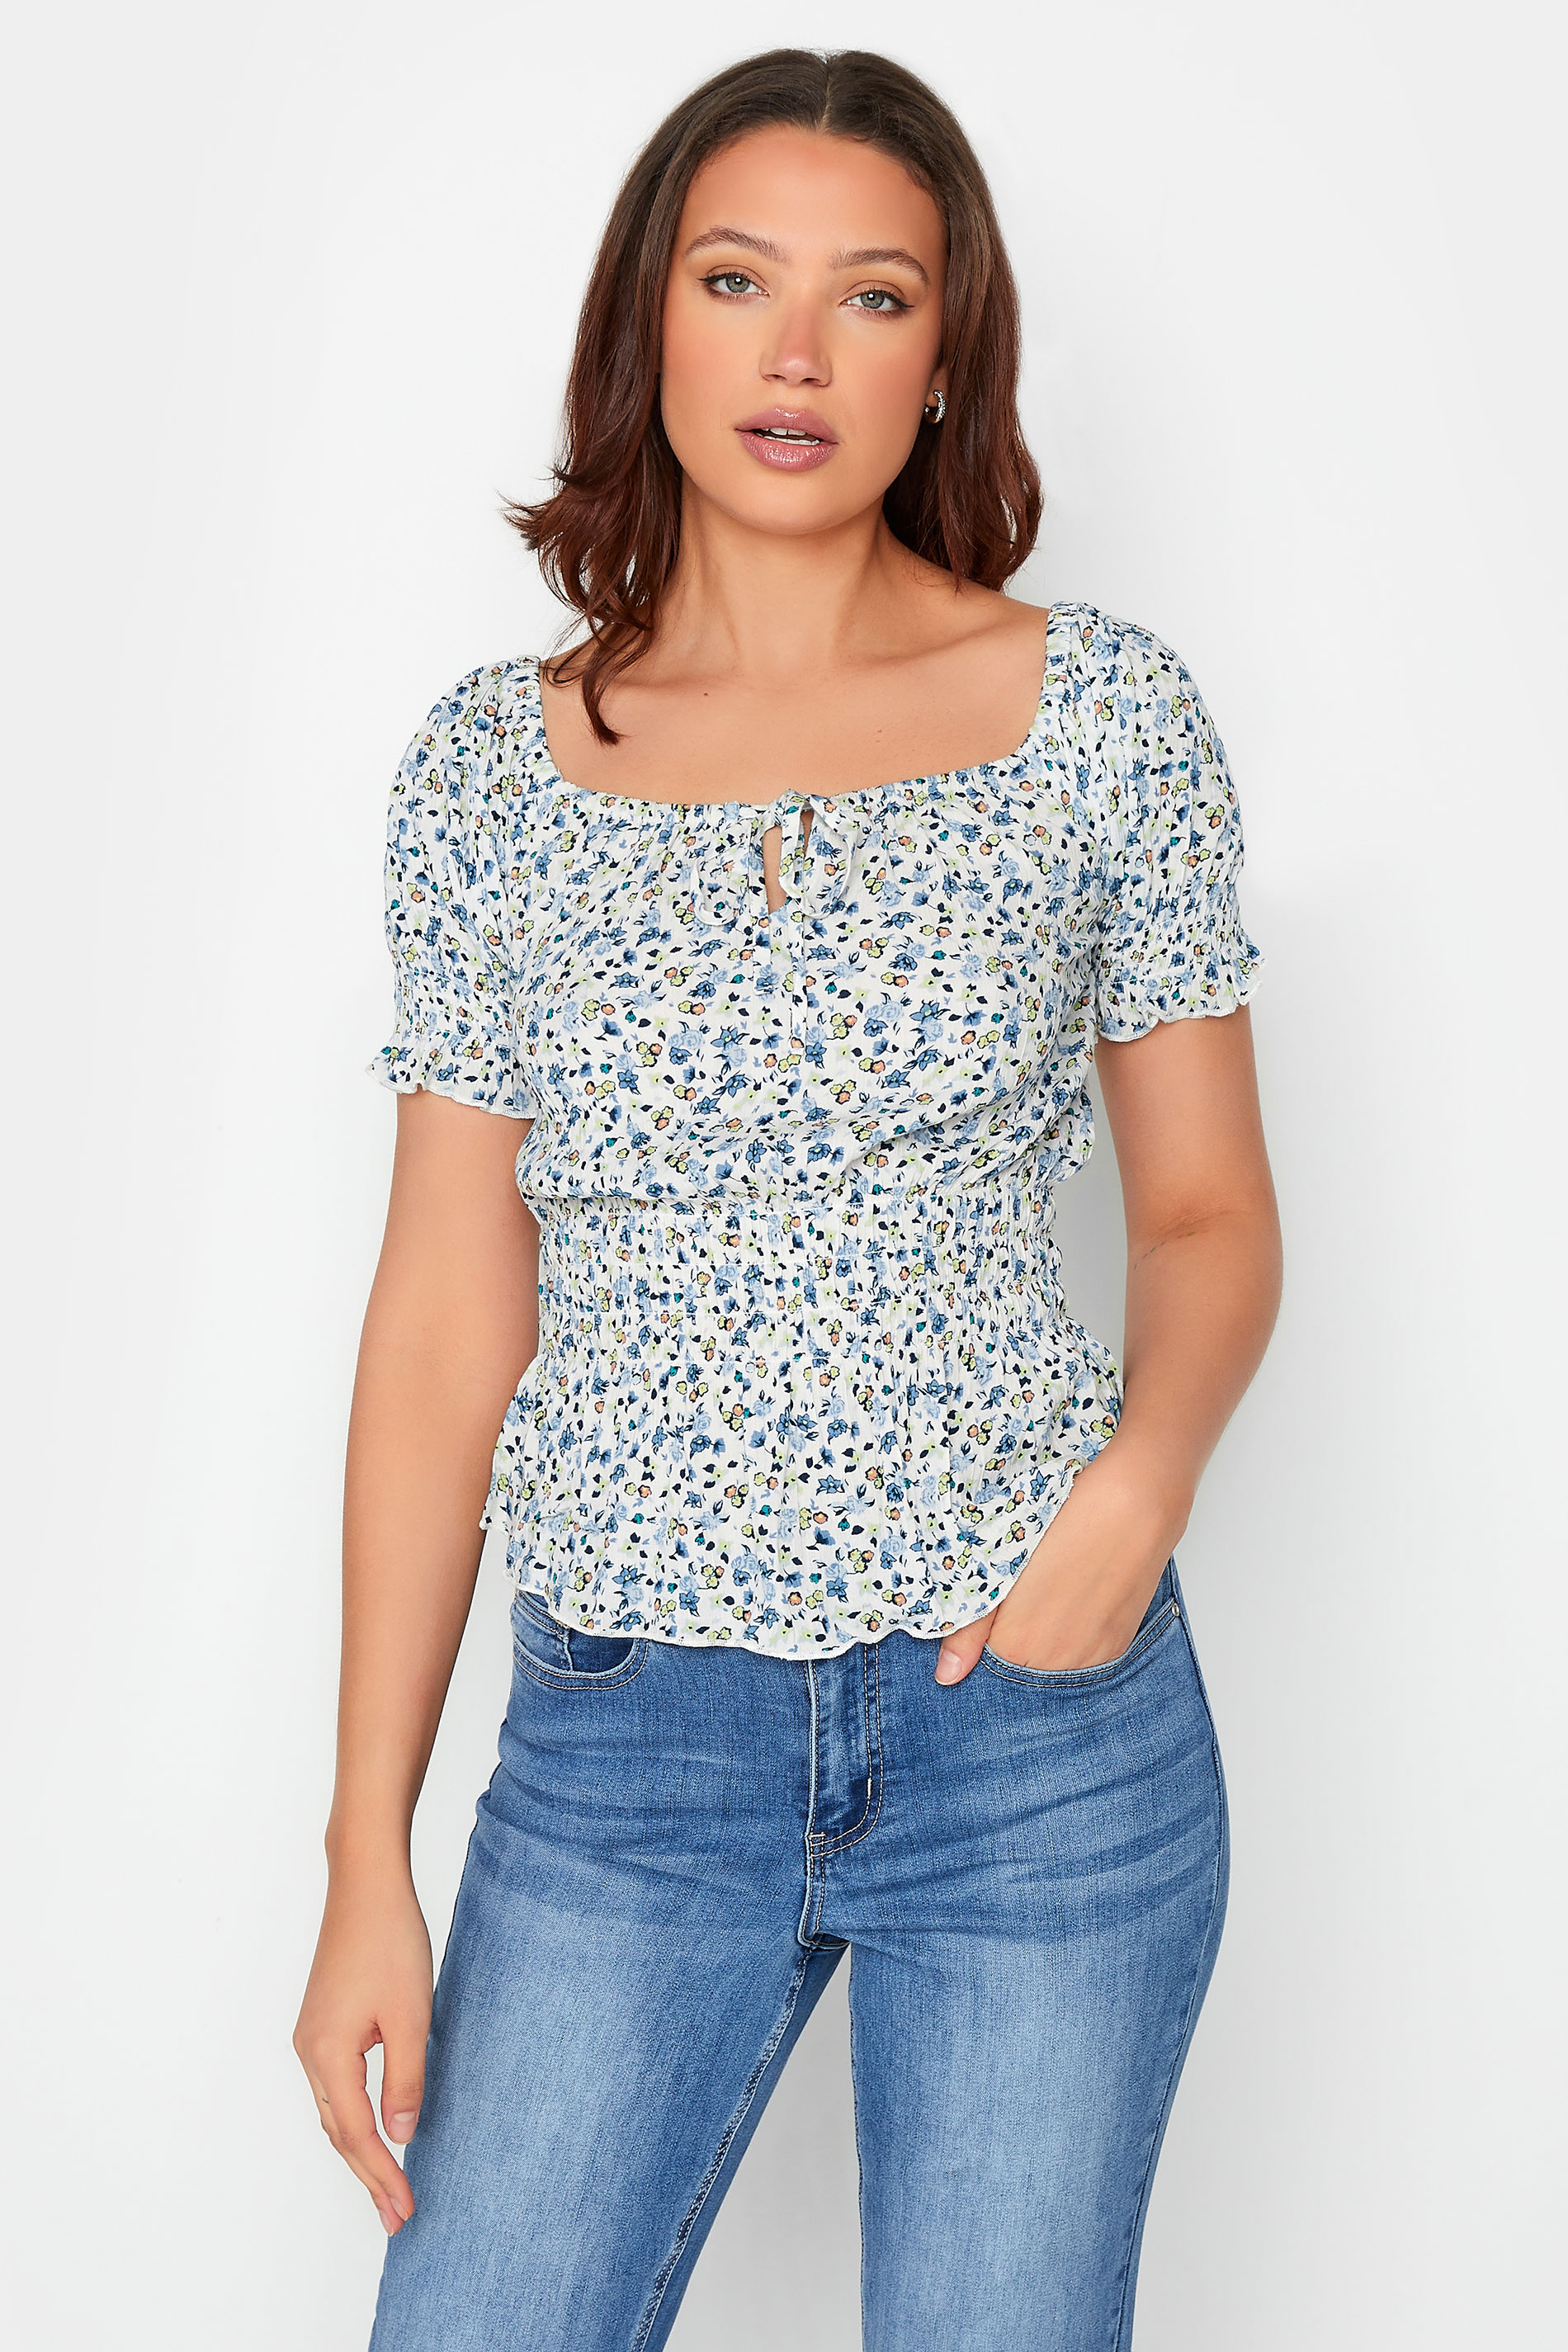 LTS Tall Women's White & Blue Floral Crinkle Bardot Top | Long Tall Sally 1